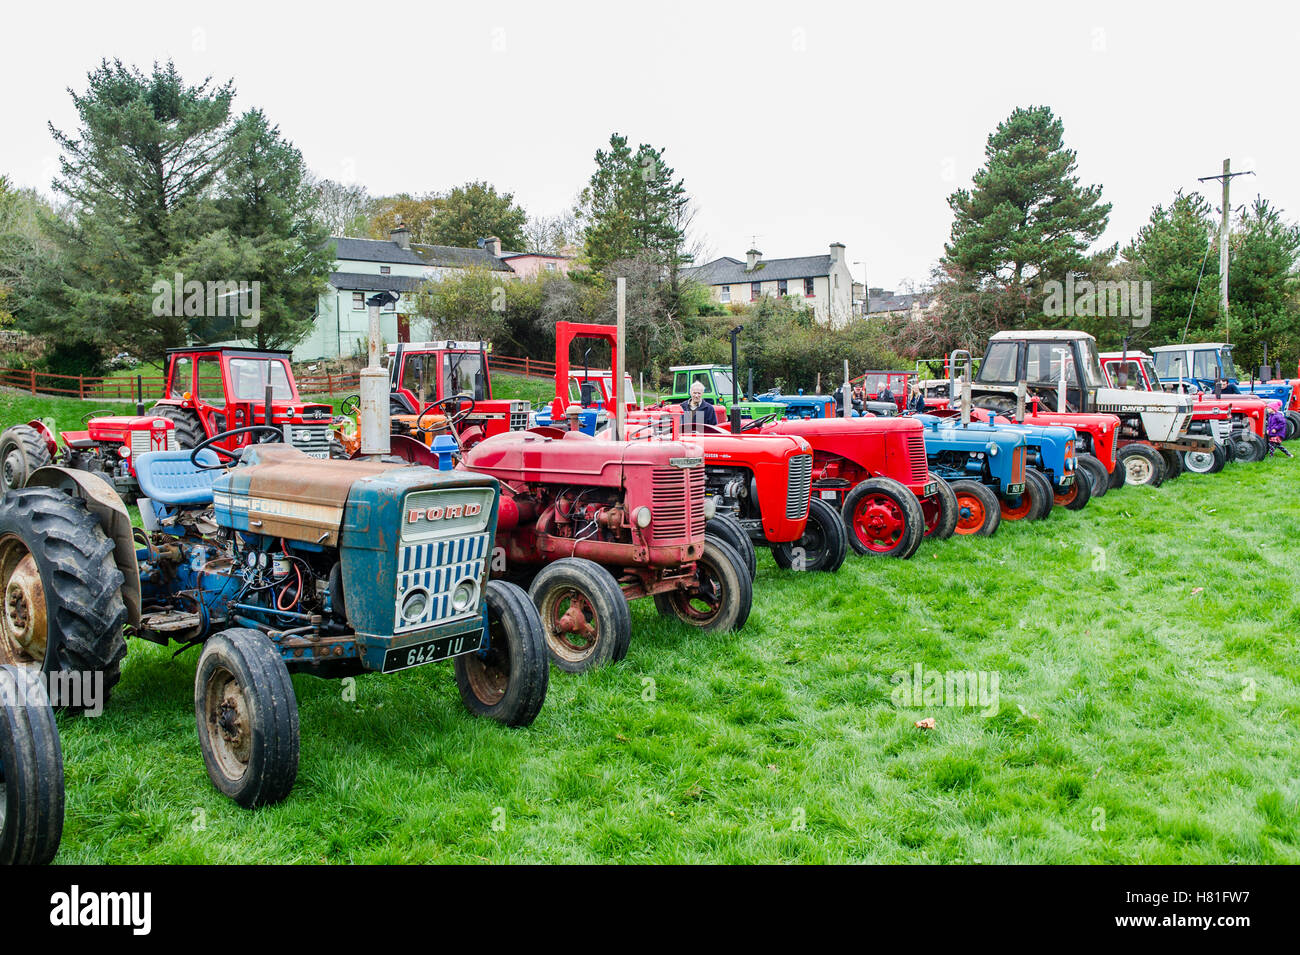 Vintage tractors on display at the Ballydehob Threshing event, Ballydehob, West Cork, Ireland with copy space. Stock Photo